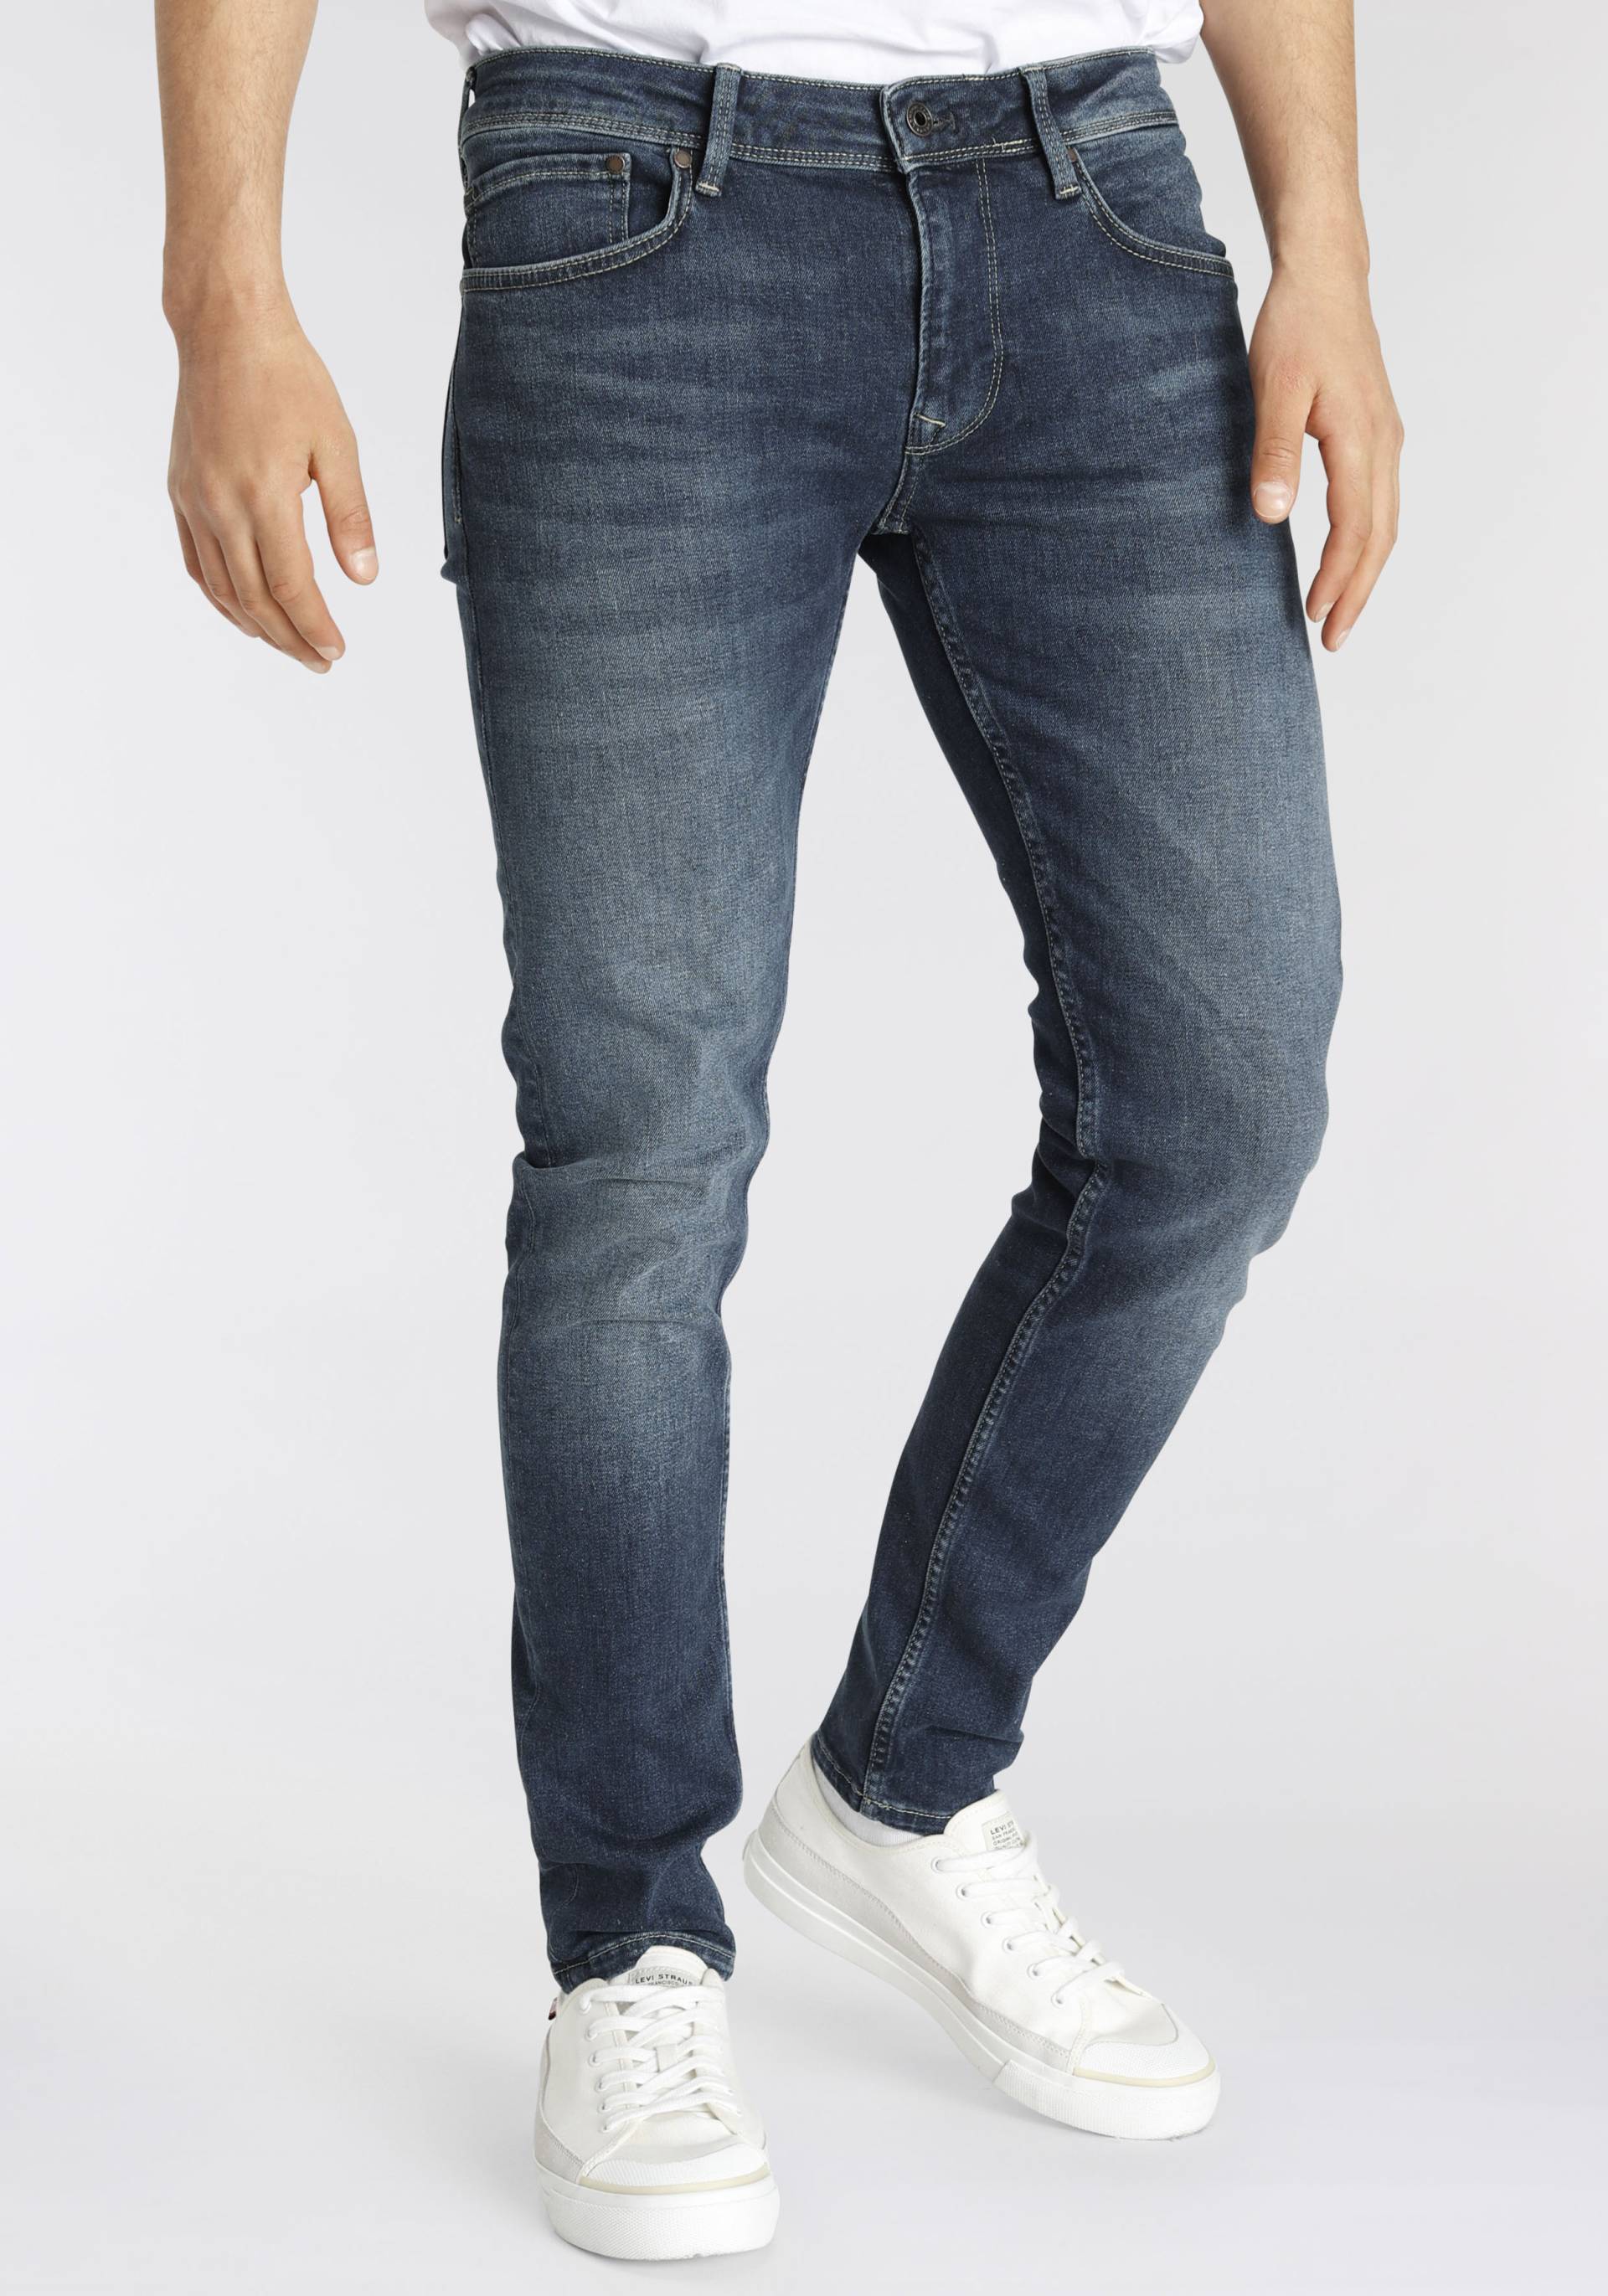 Pepe Jeans Skinny-fit-Jeans »Finsbury« von Pepe Jeans